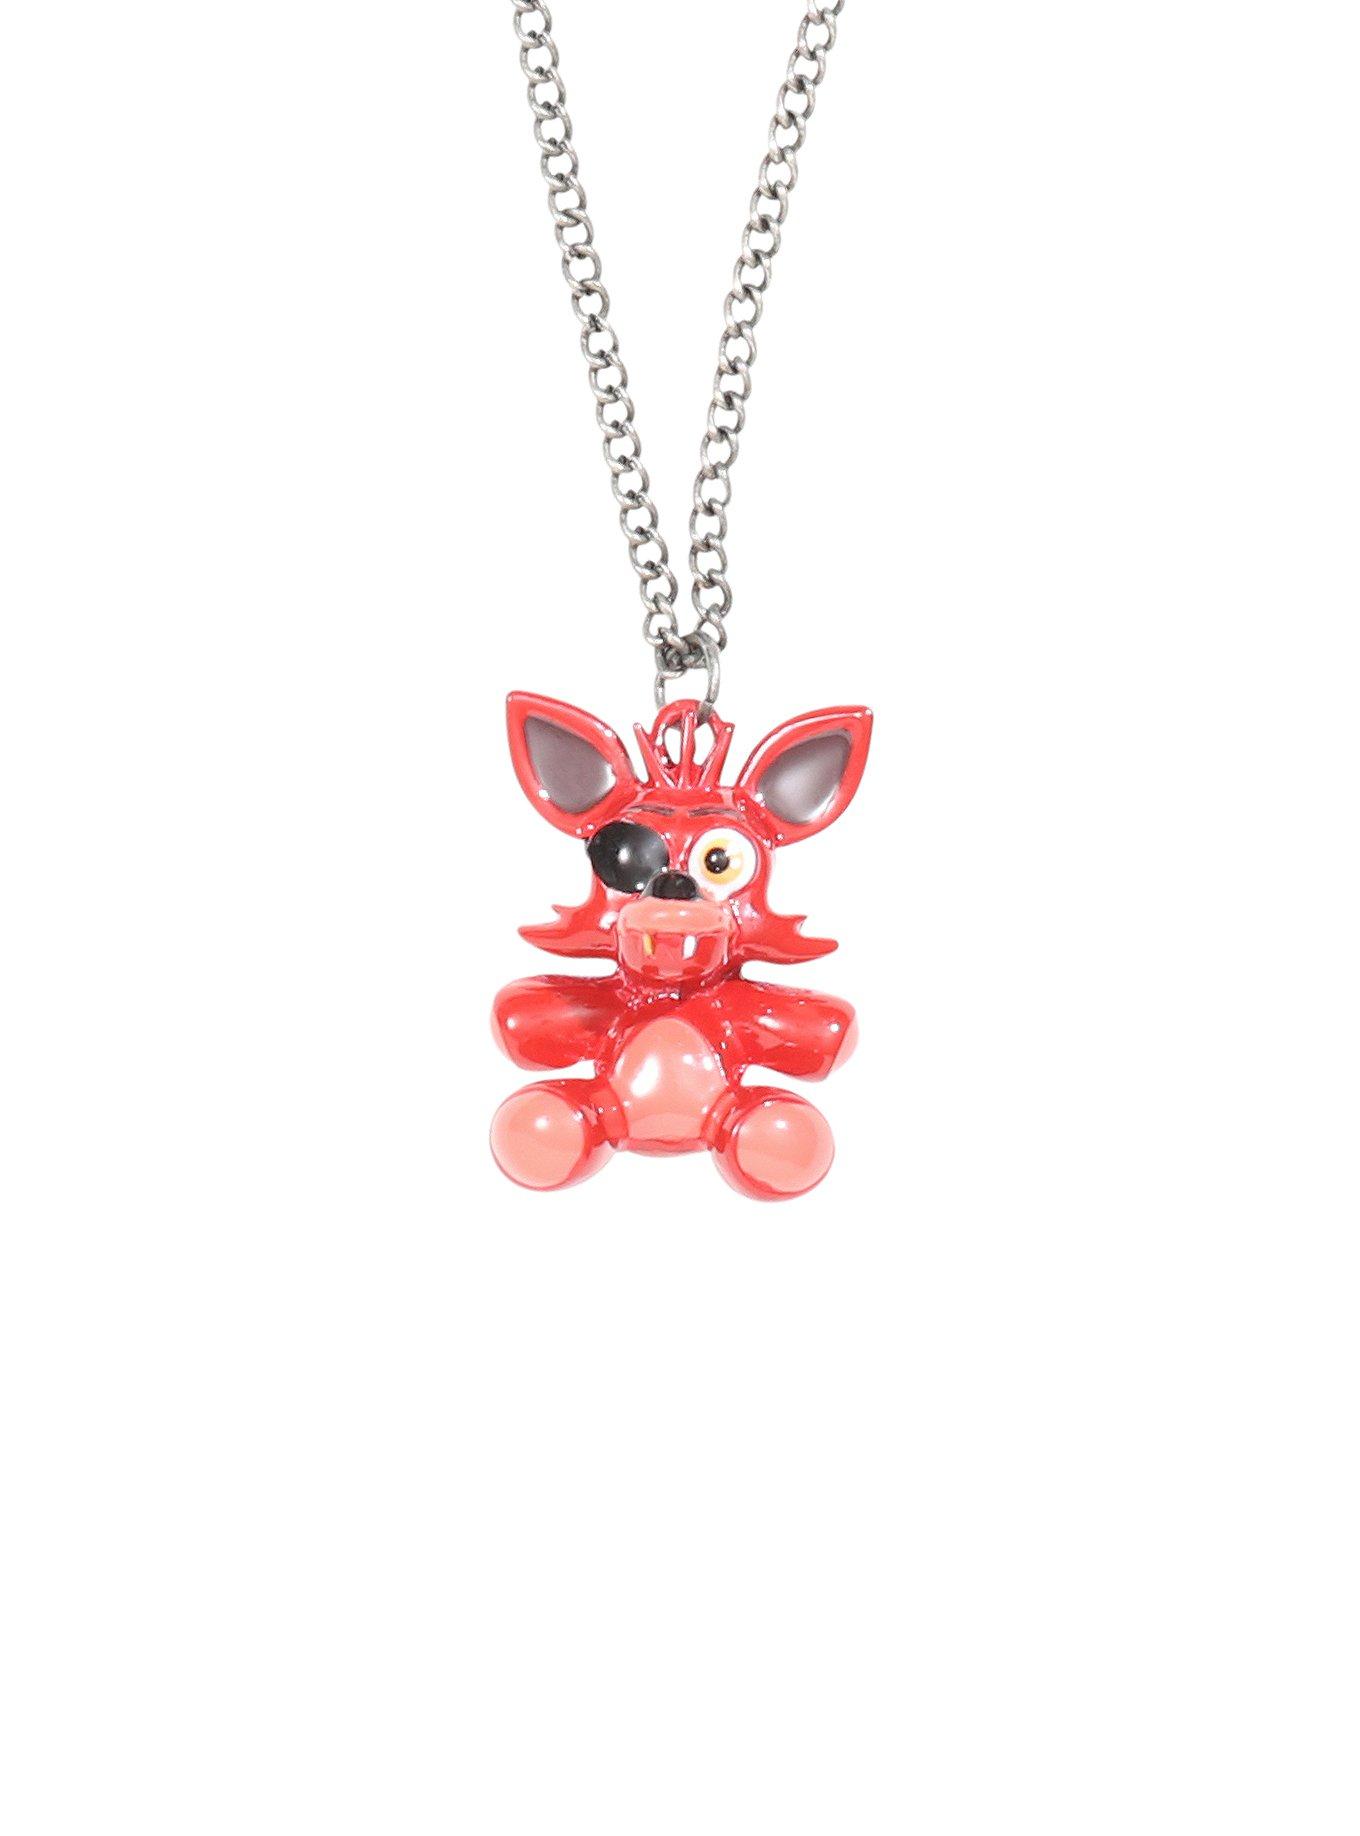 12 Styles Five Nights At Freddys FNAF Fashion Necklace Pendant For Kids  Christmas Gifts Hight Quality From Rino, $1.59